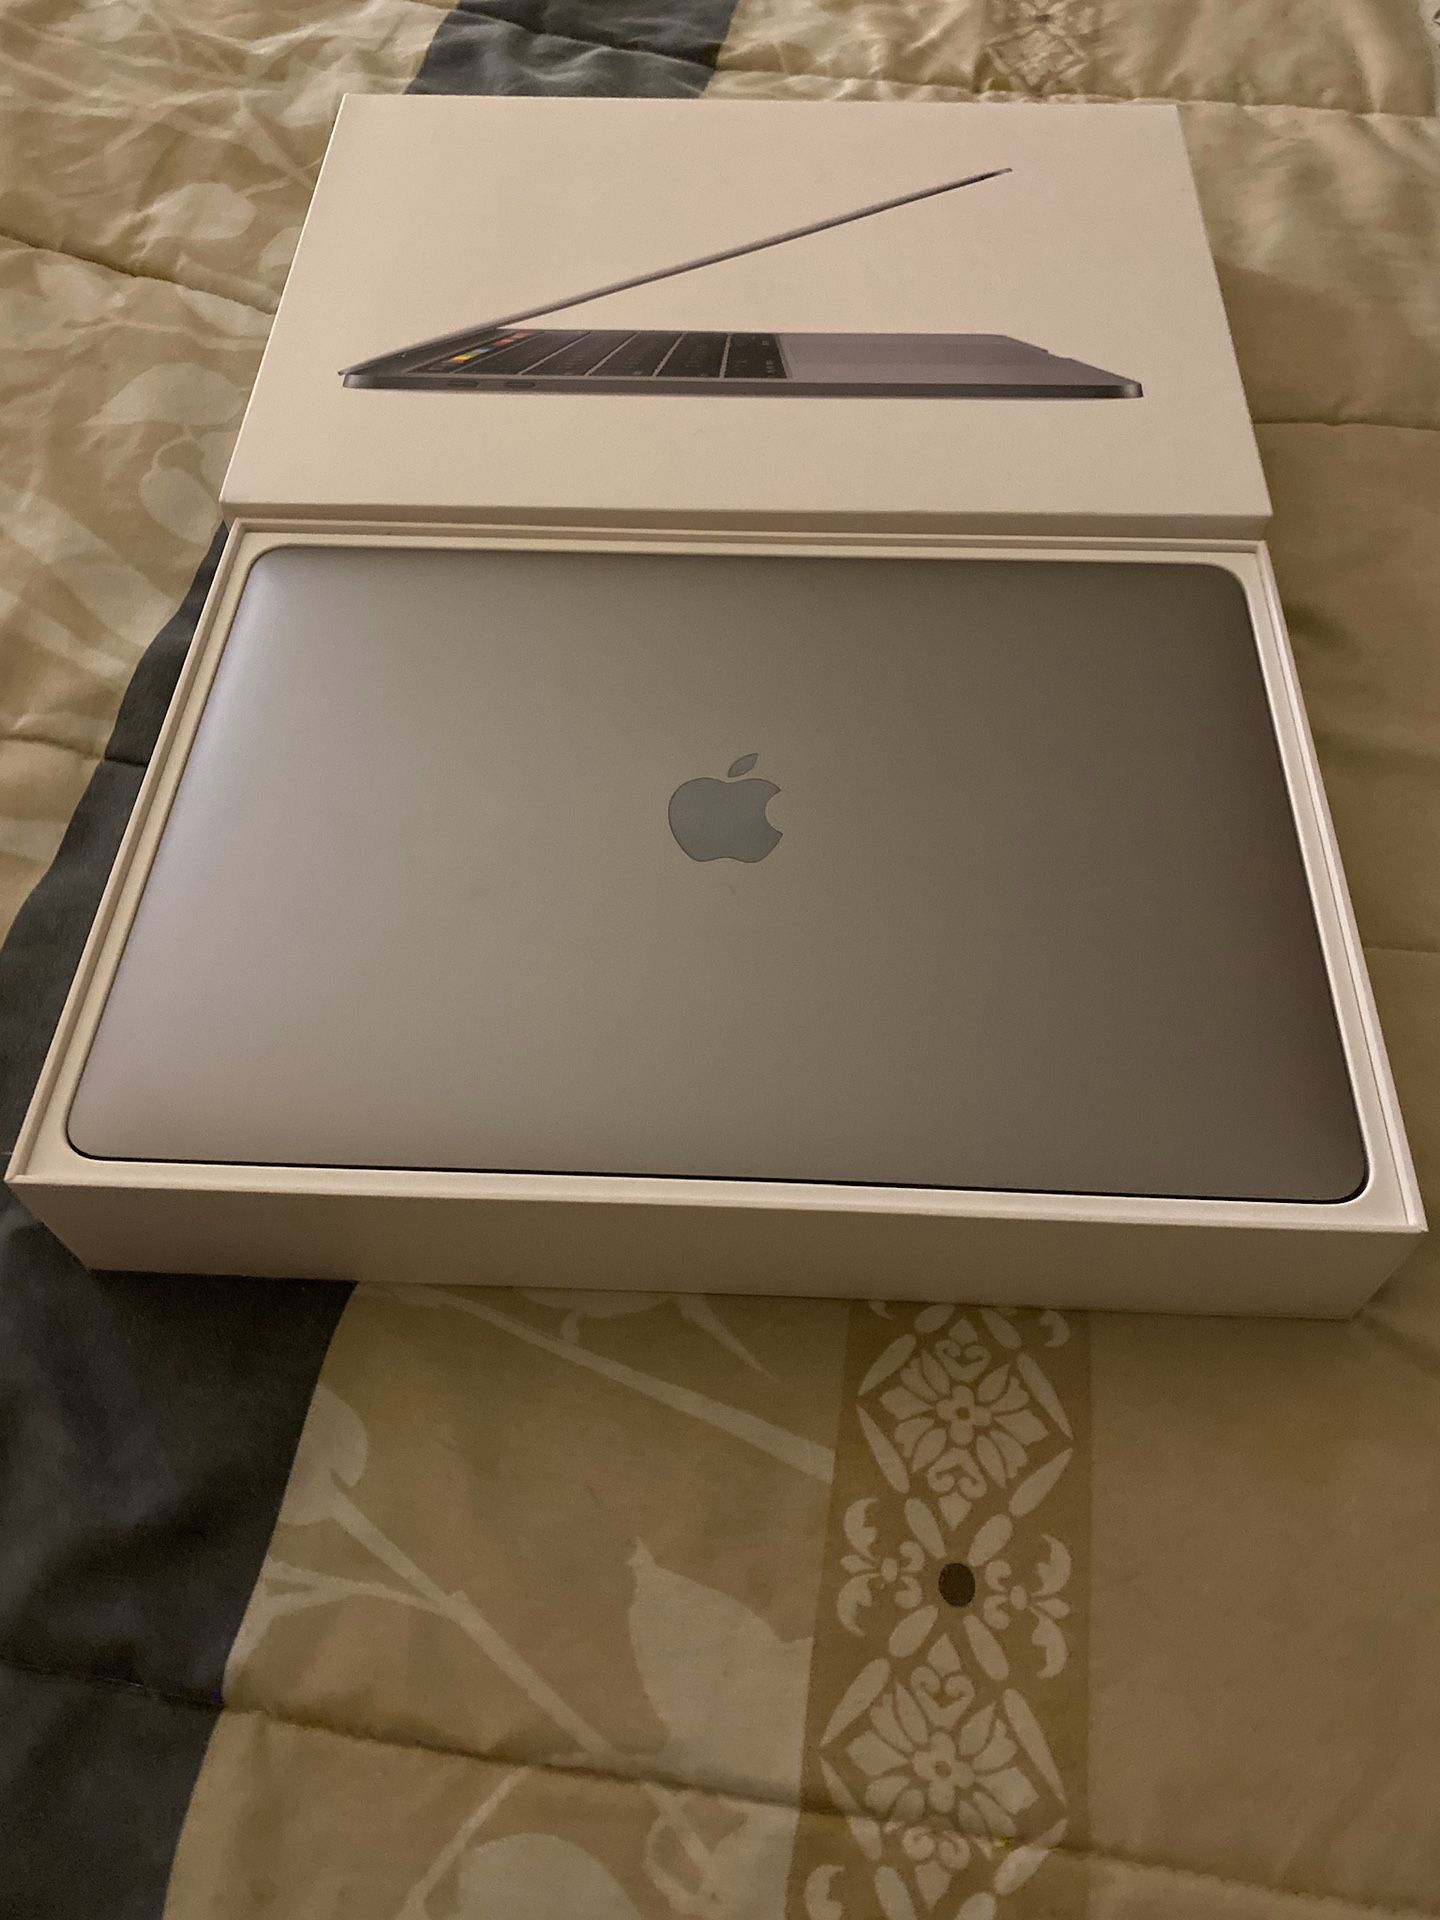 LUCK BRAND NEW CONDITION 15” MACBOOK PRO TOCH BAR i7 -16GB RAM AND 1TB FLASH DRIVE PLUS WARRANTY FROM APPLE CARE FROM APPLE STORE LATER 2017